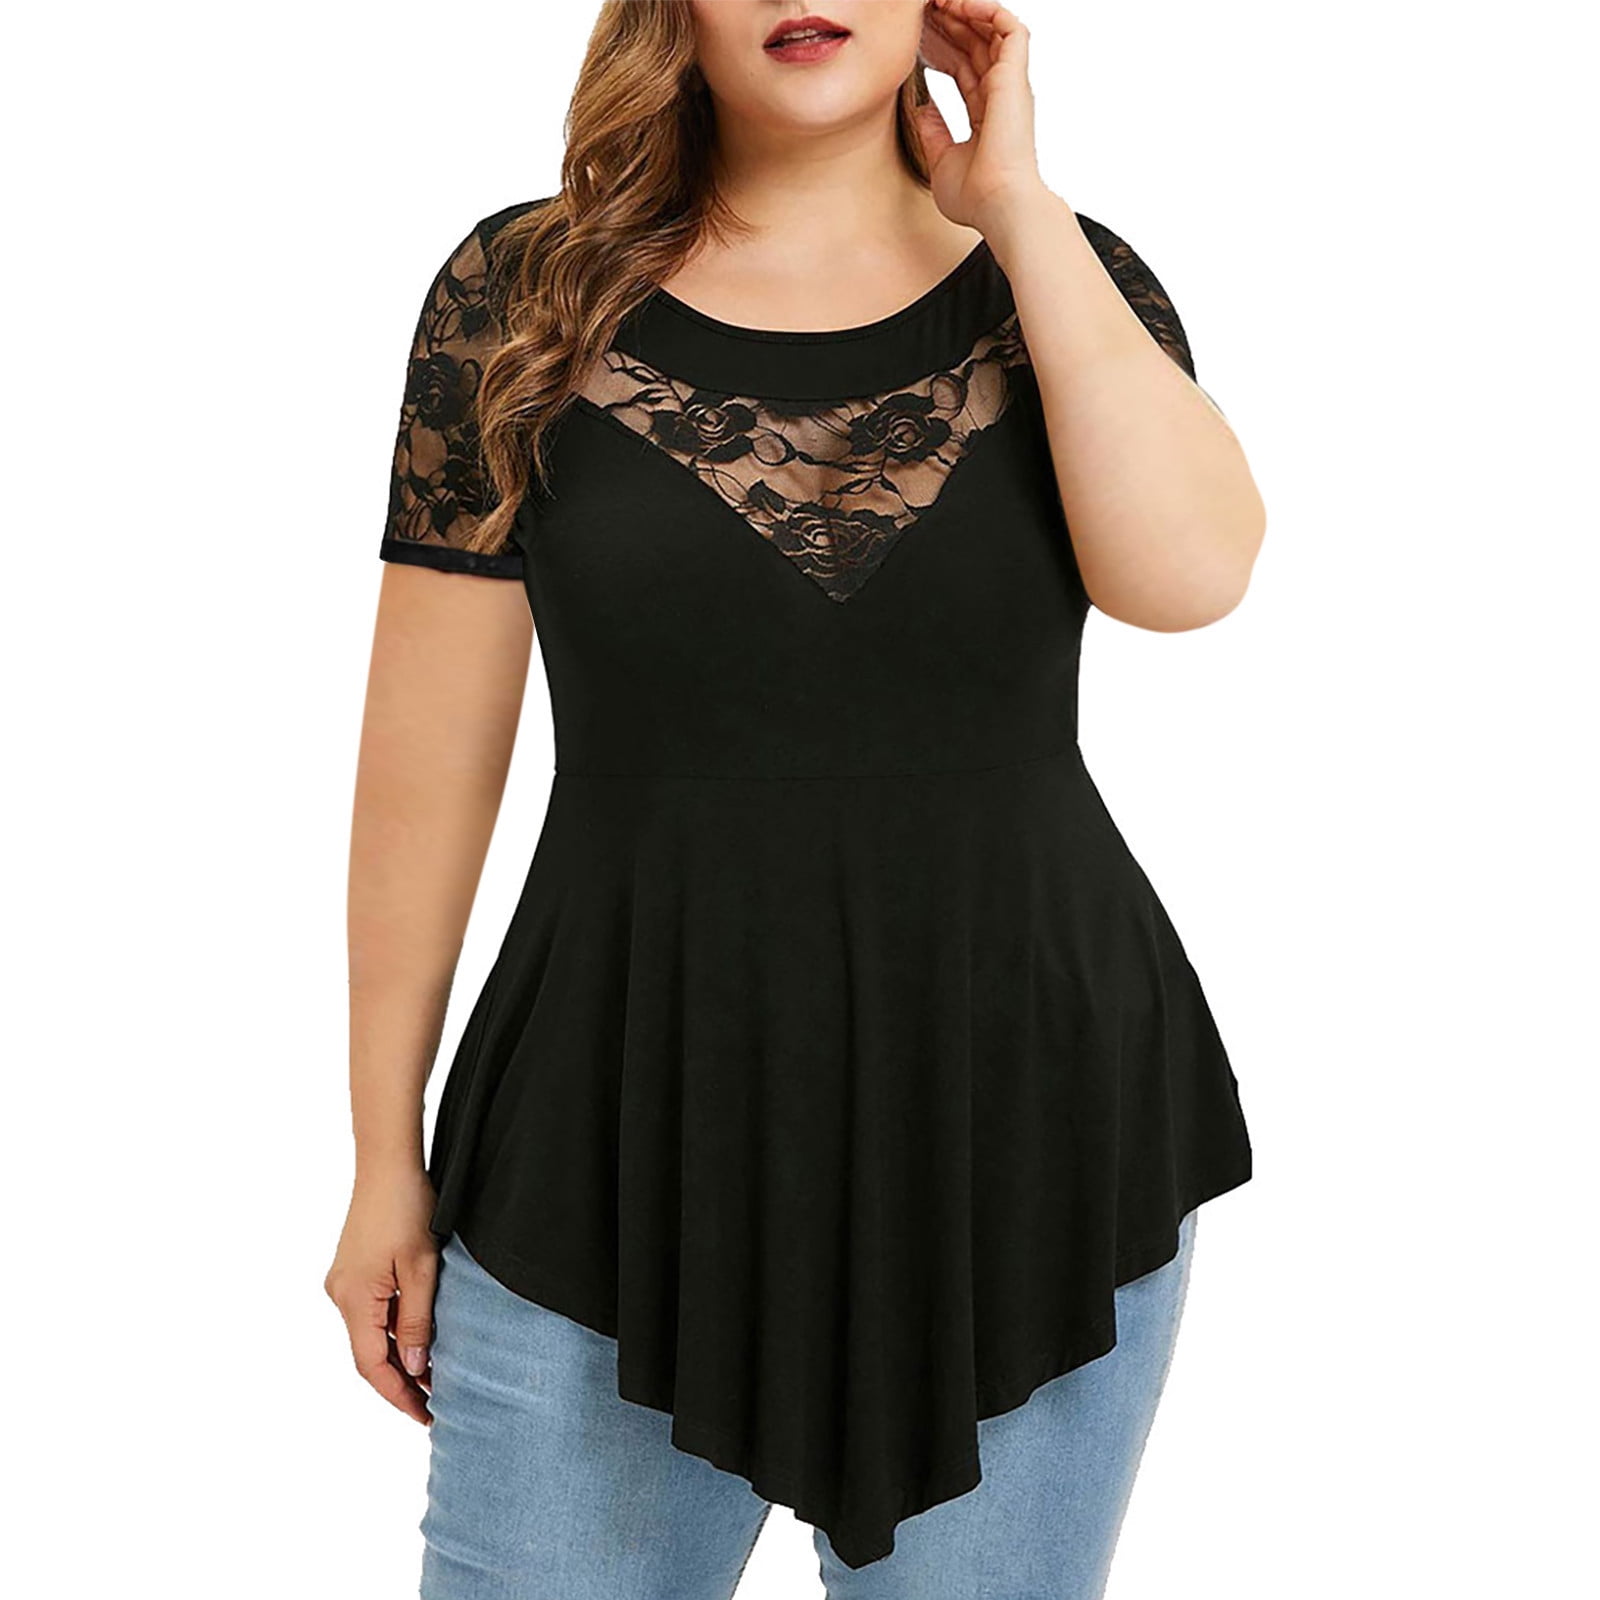 Patlollav Womens Tops Clearance Plus Size Ladies Solid Floral Lace ...